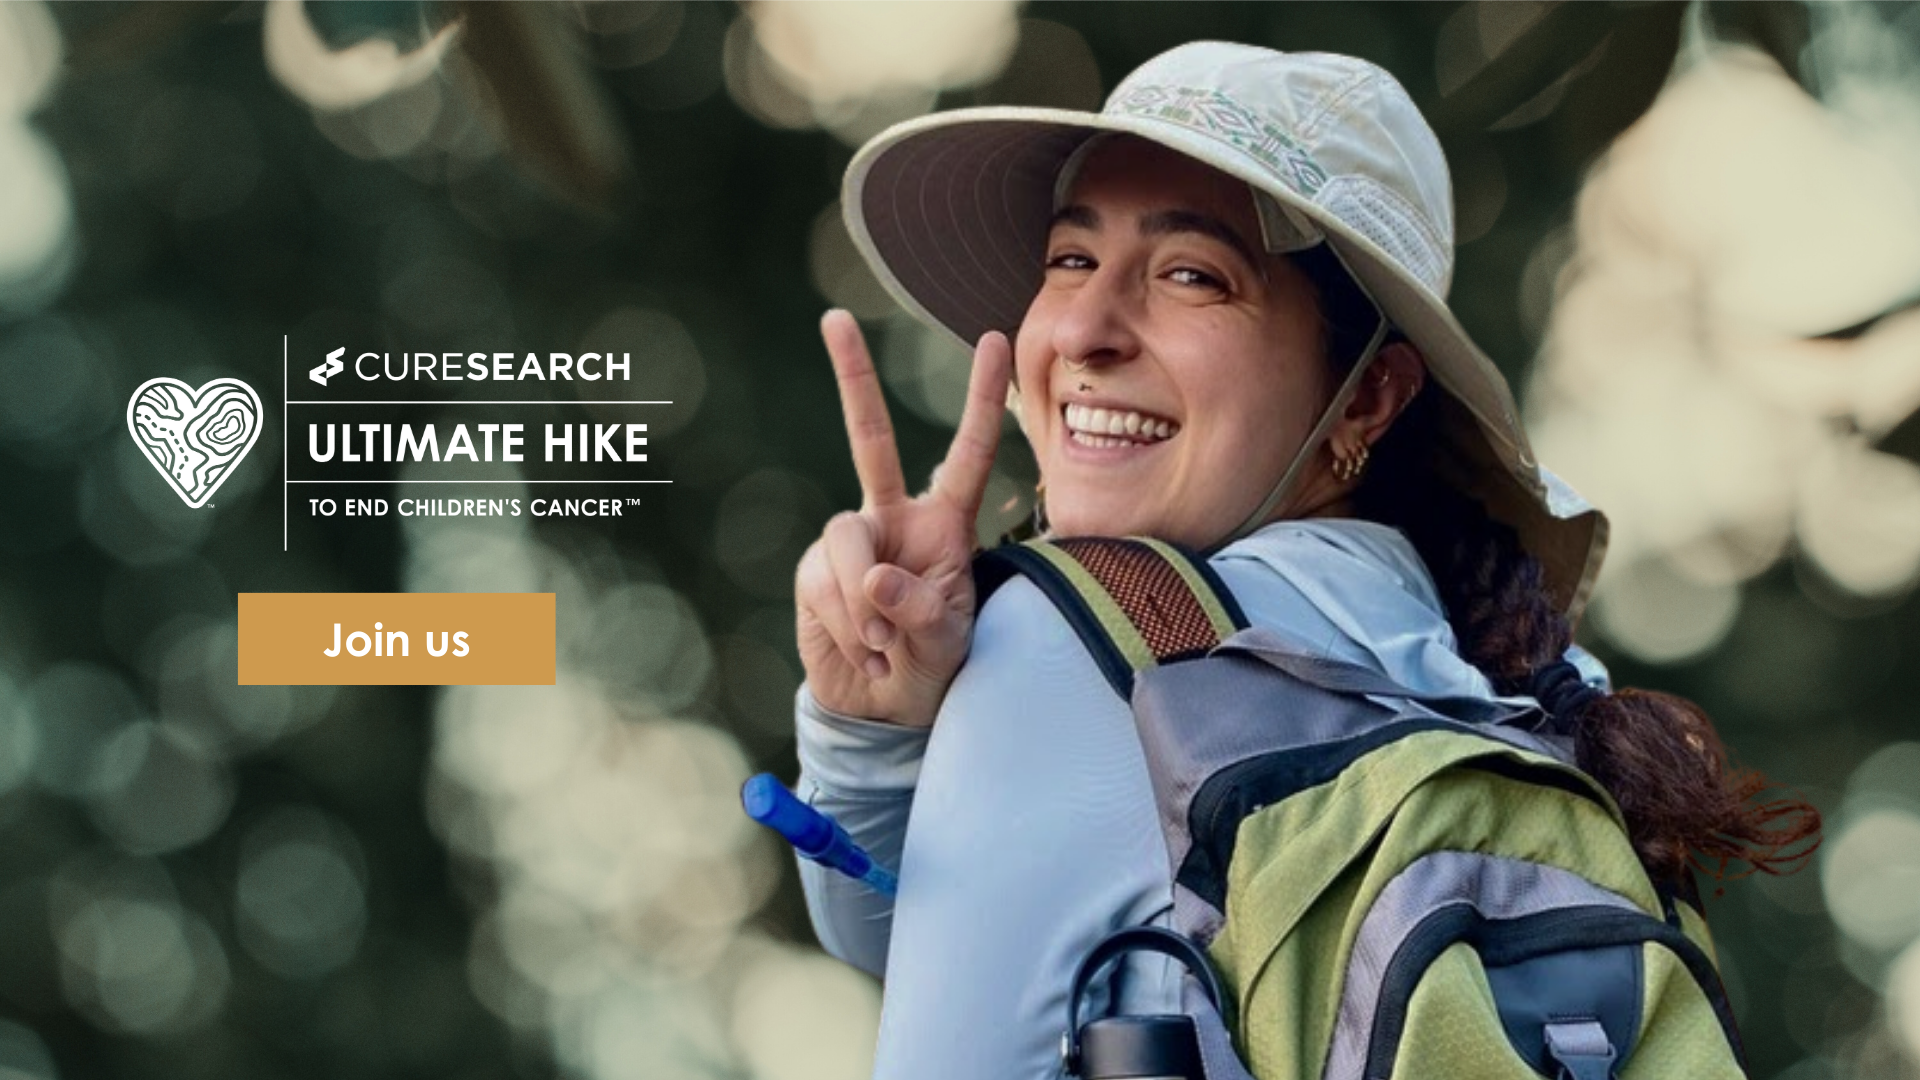 CureSearch Ultimate Hike is the only hiking endurance program focused on childhood cancer. To date, Ultimate Hikers have raised over $10 million in support of CureSearch's mission to end childhood cancer.